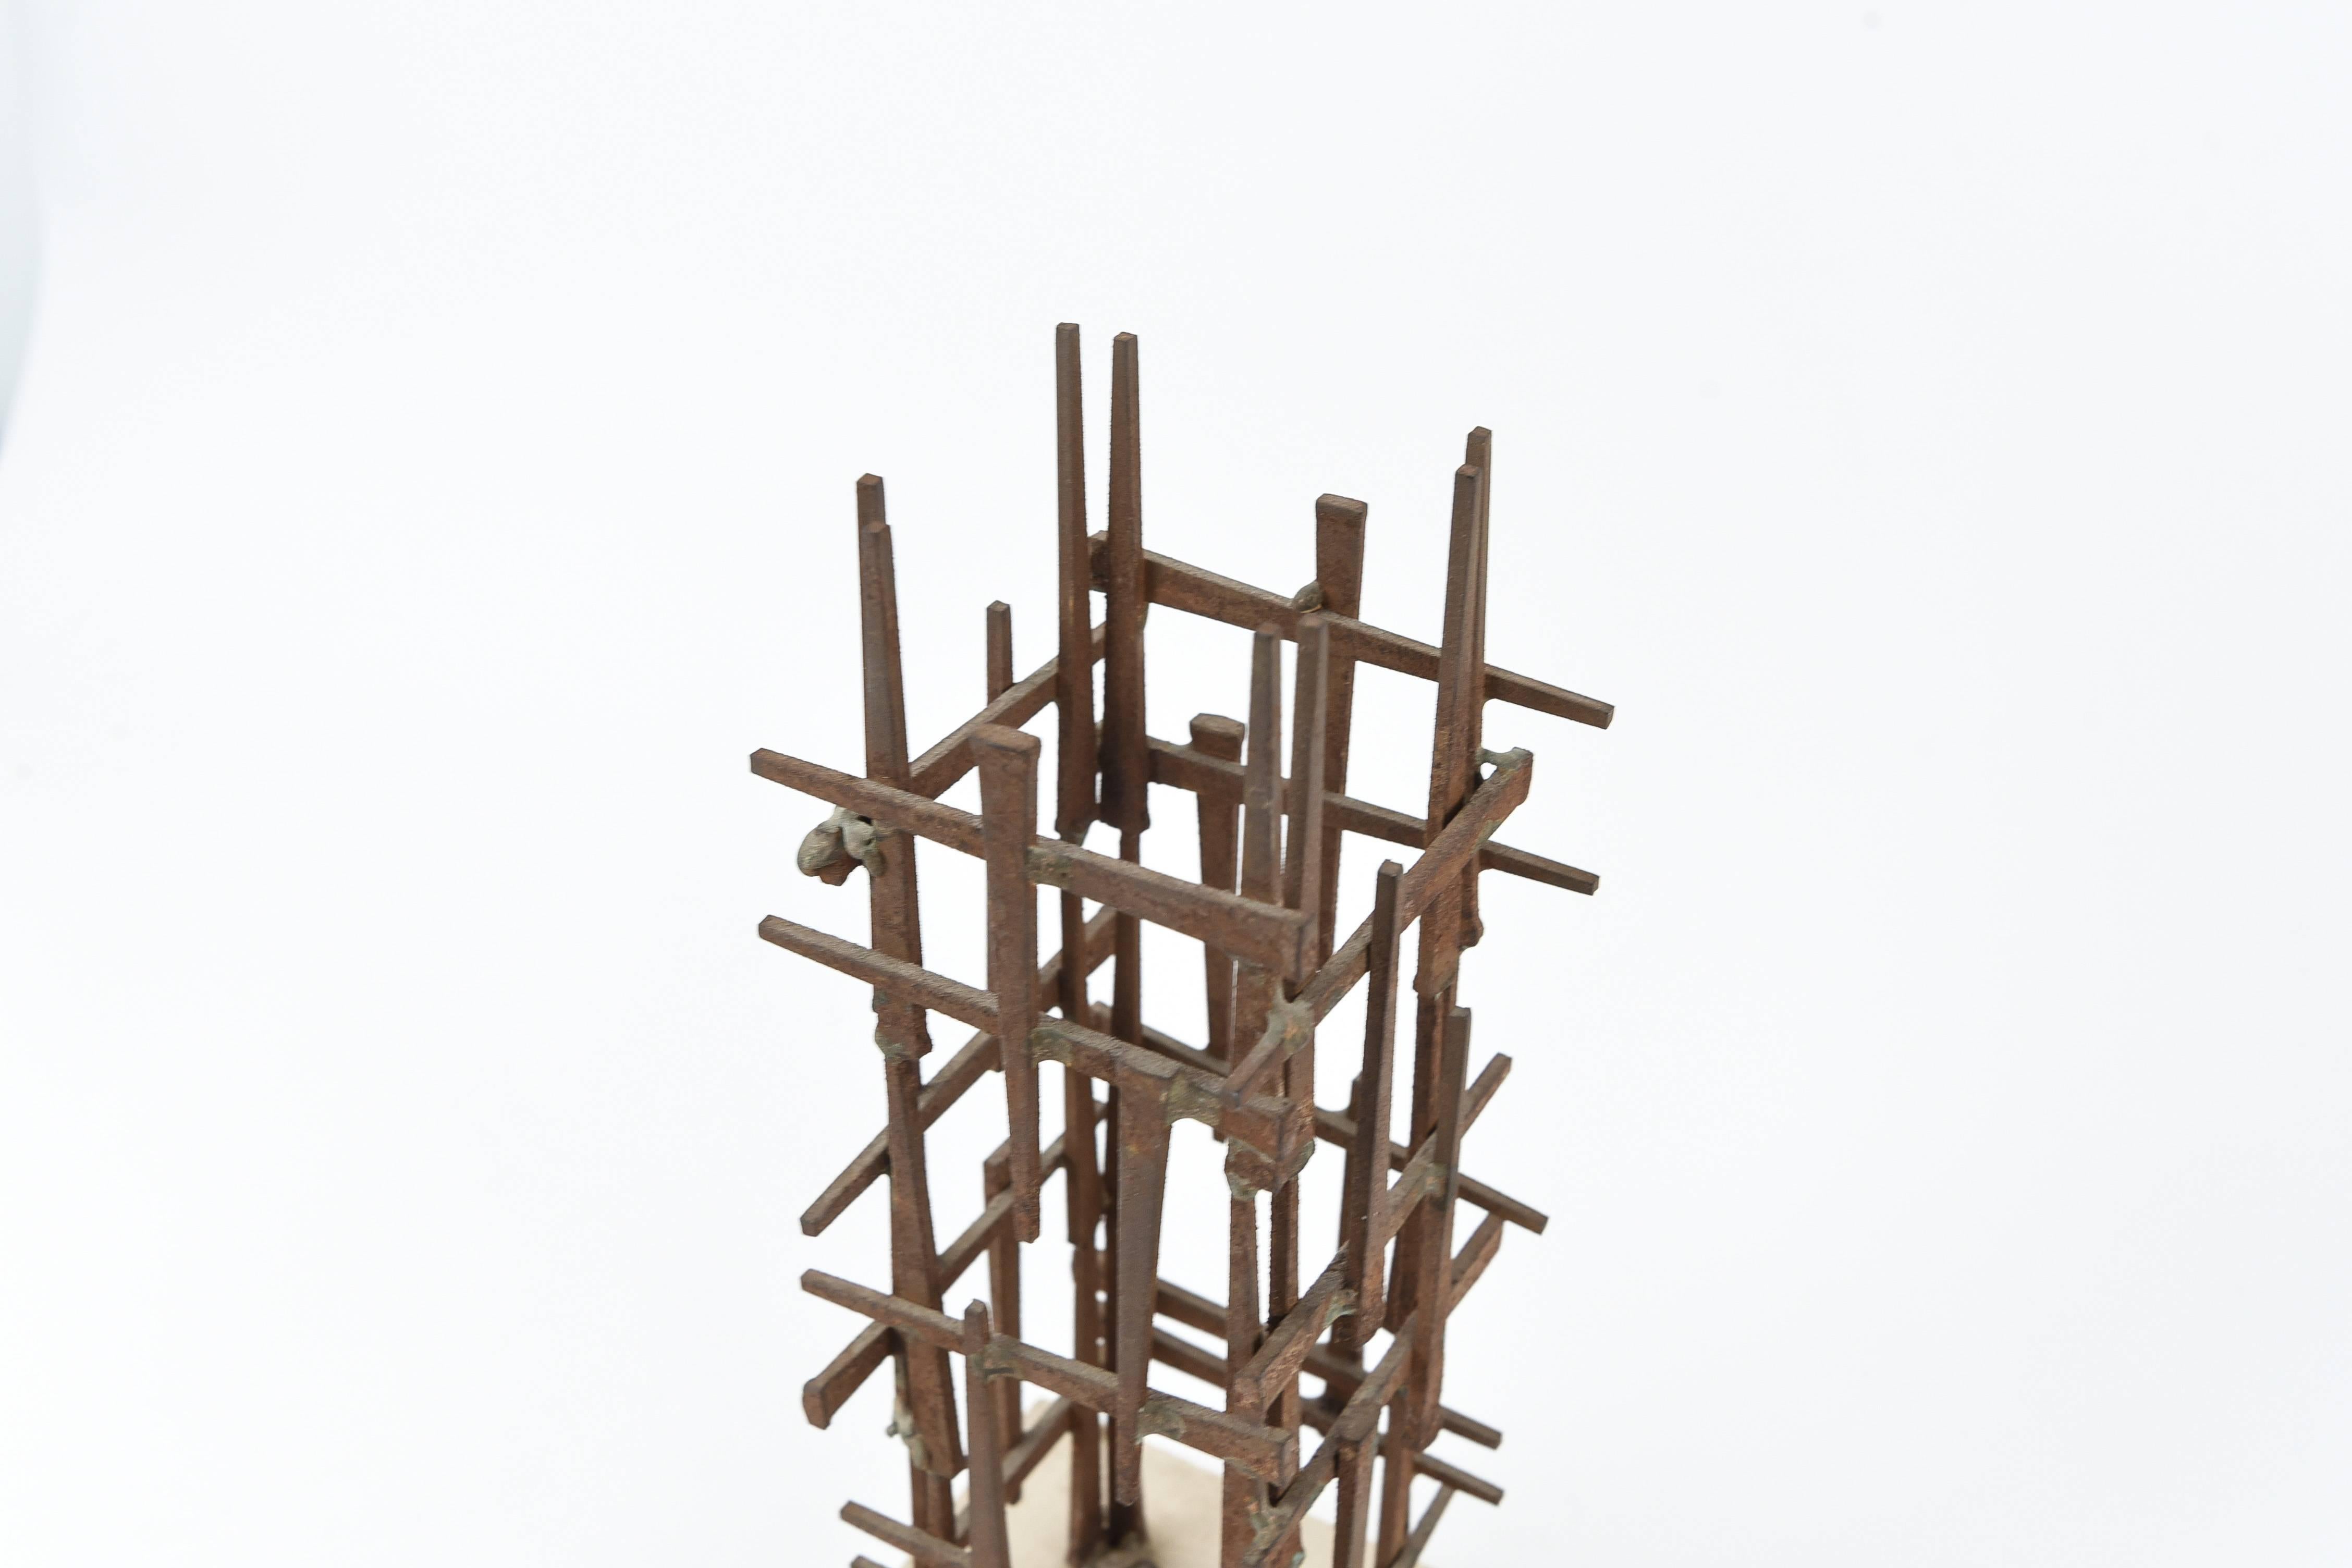 Untitled (steel nails mounted ). With initials SC and copyright symbol on marble base, circa 1970s. An interesting sculpture crafted of flat head iron nails welded into a vertical structure.